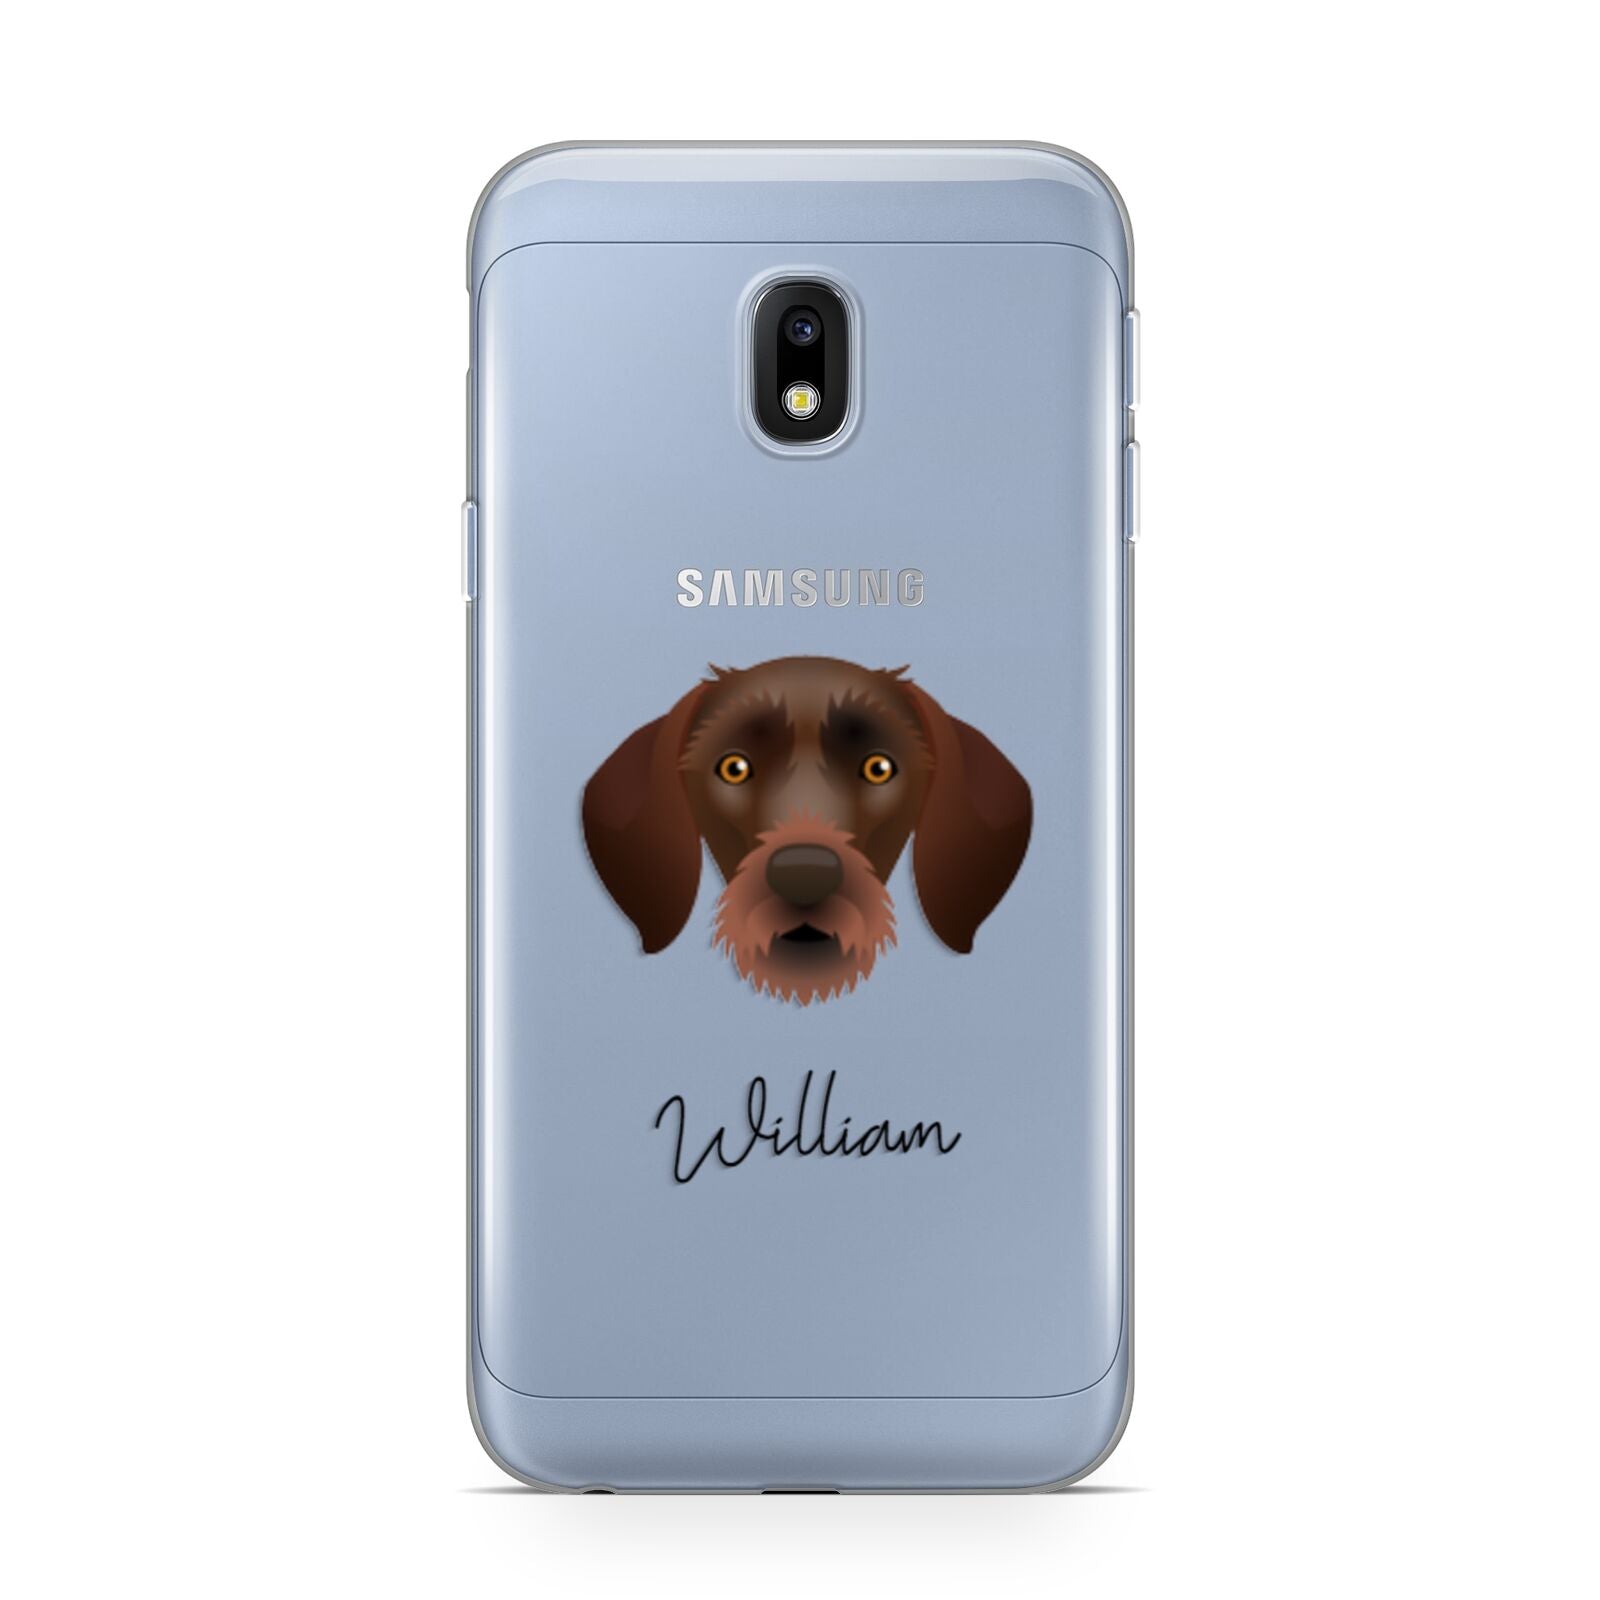 German Wirehaired Pointer Personalised Samsung Galaxy J3 2017 Case